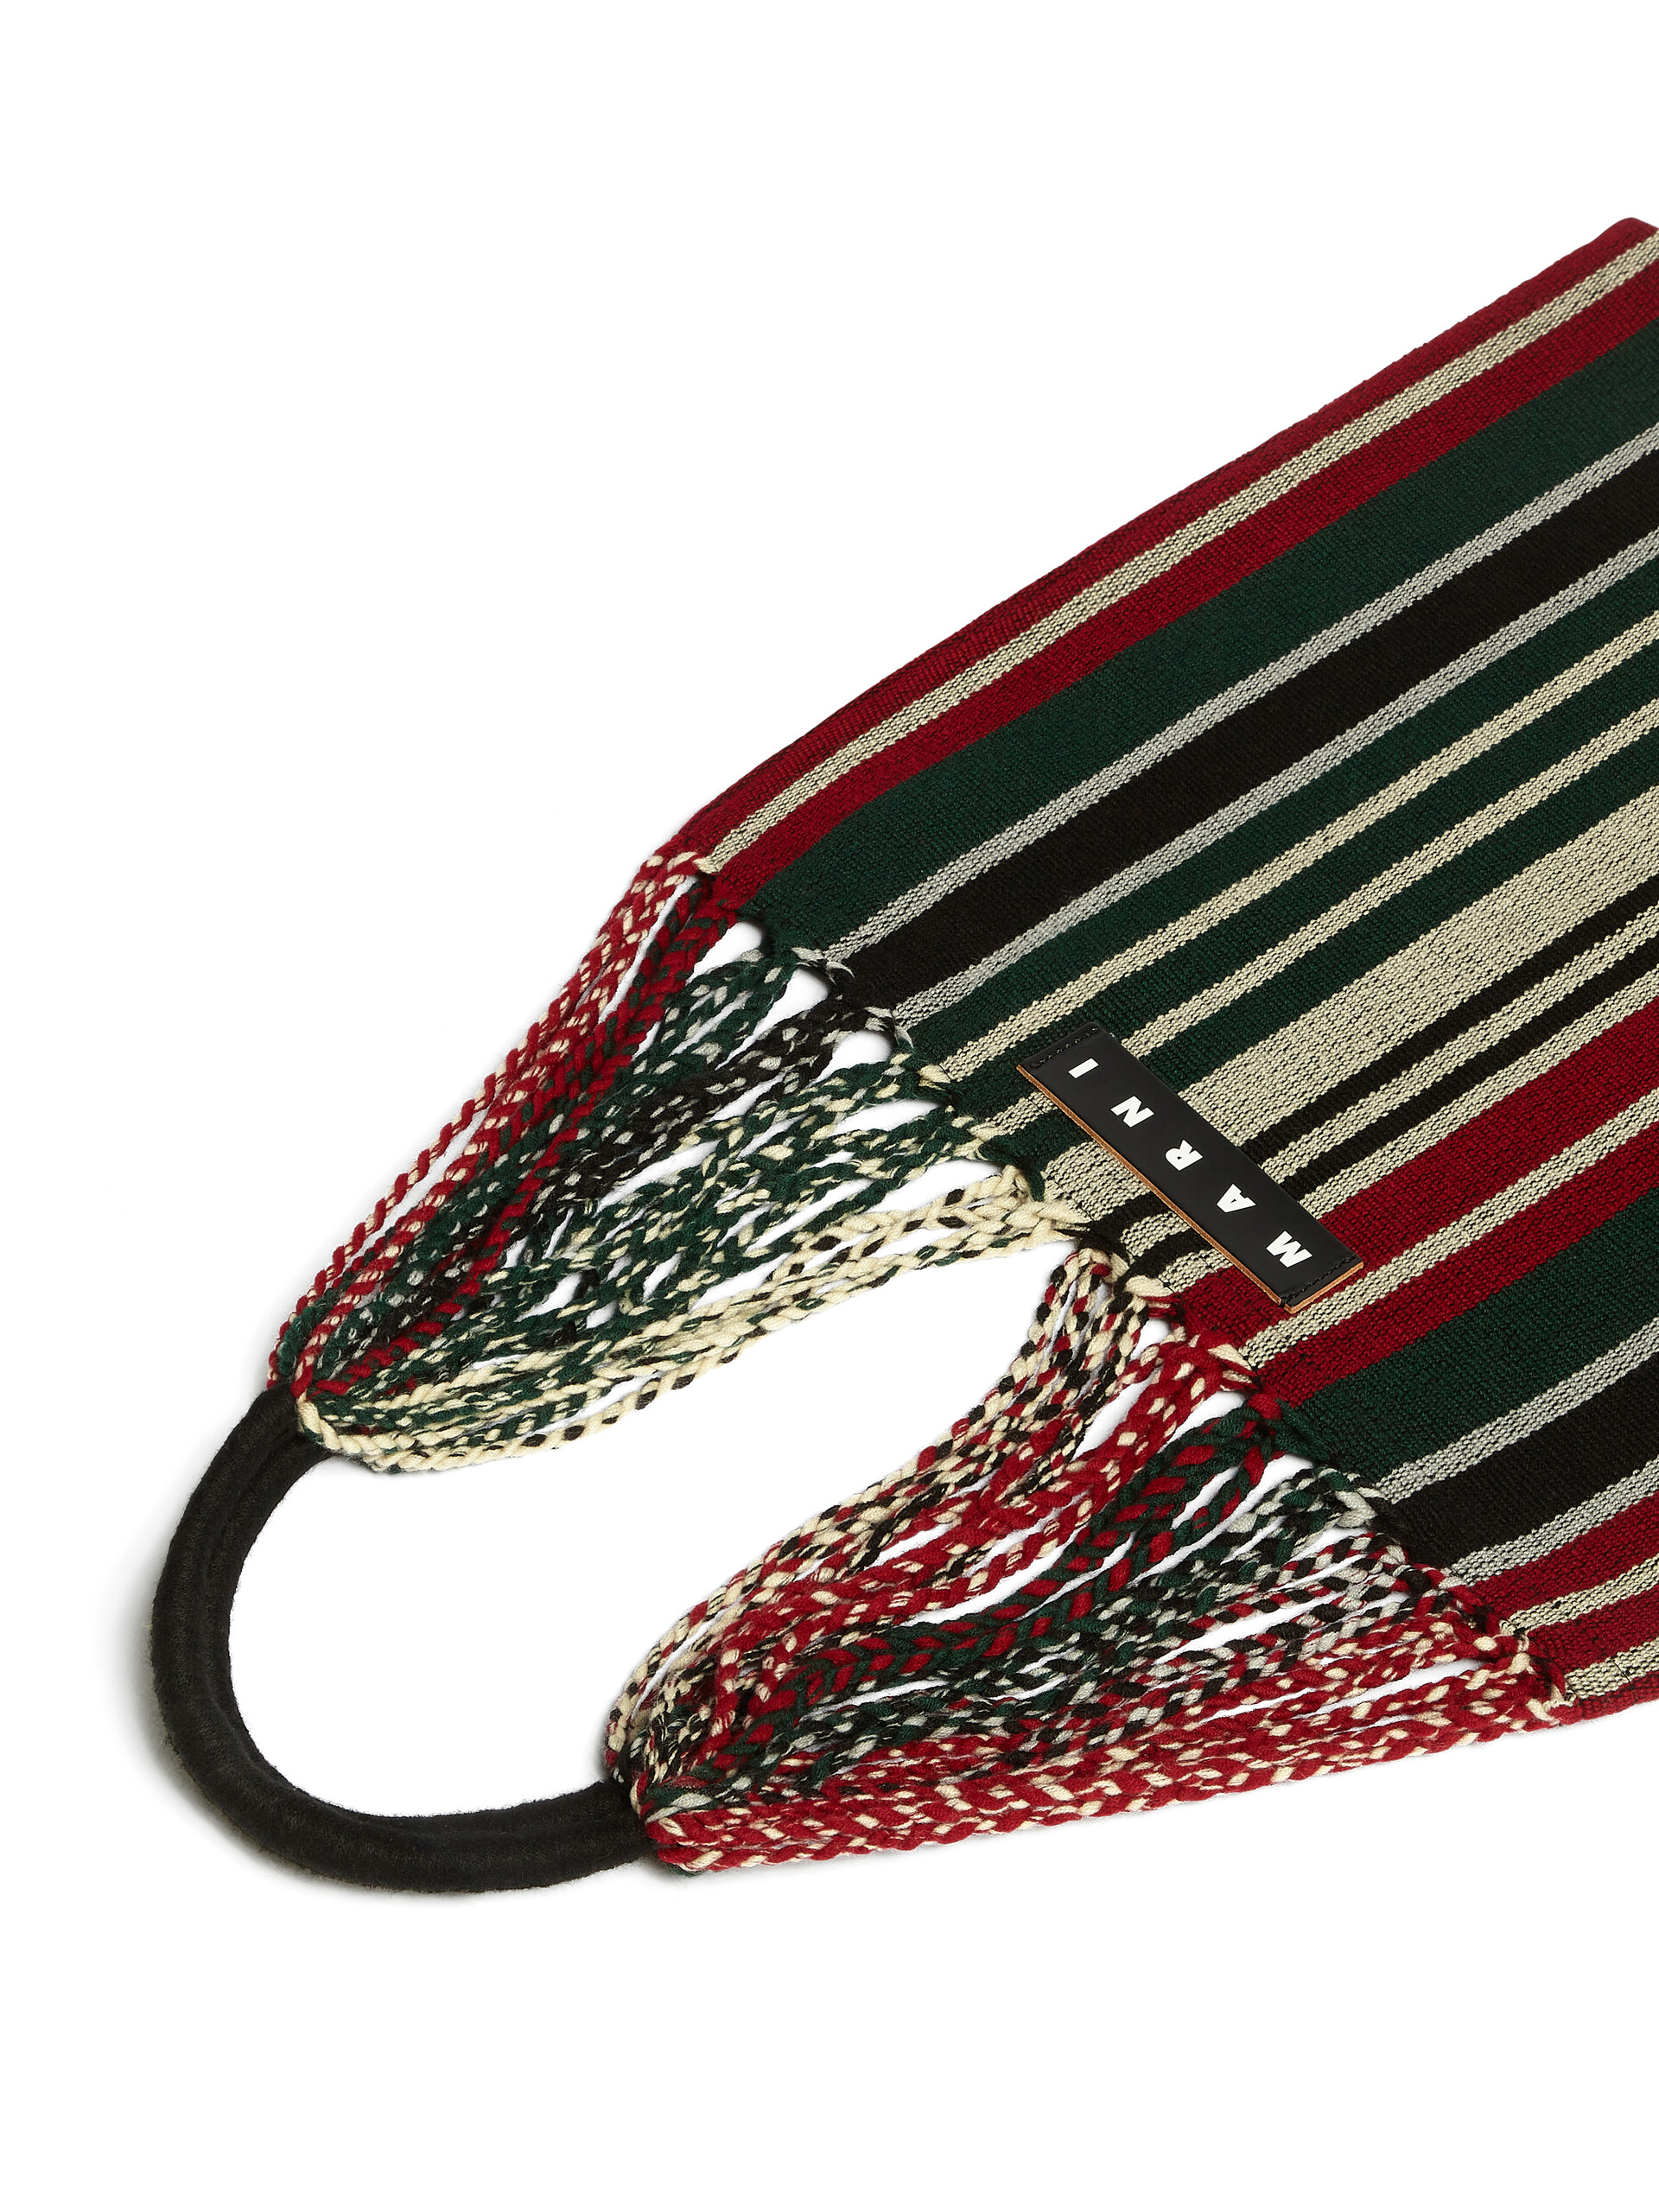 MARNI MARKET HAMMOCK bag in multicolour red polyester - Bags - Image 4